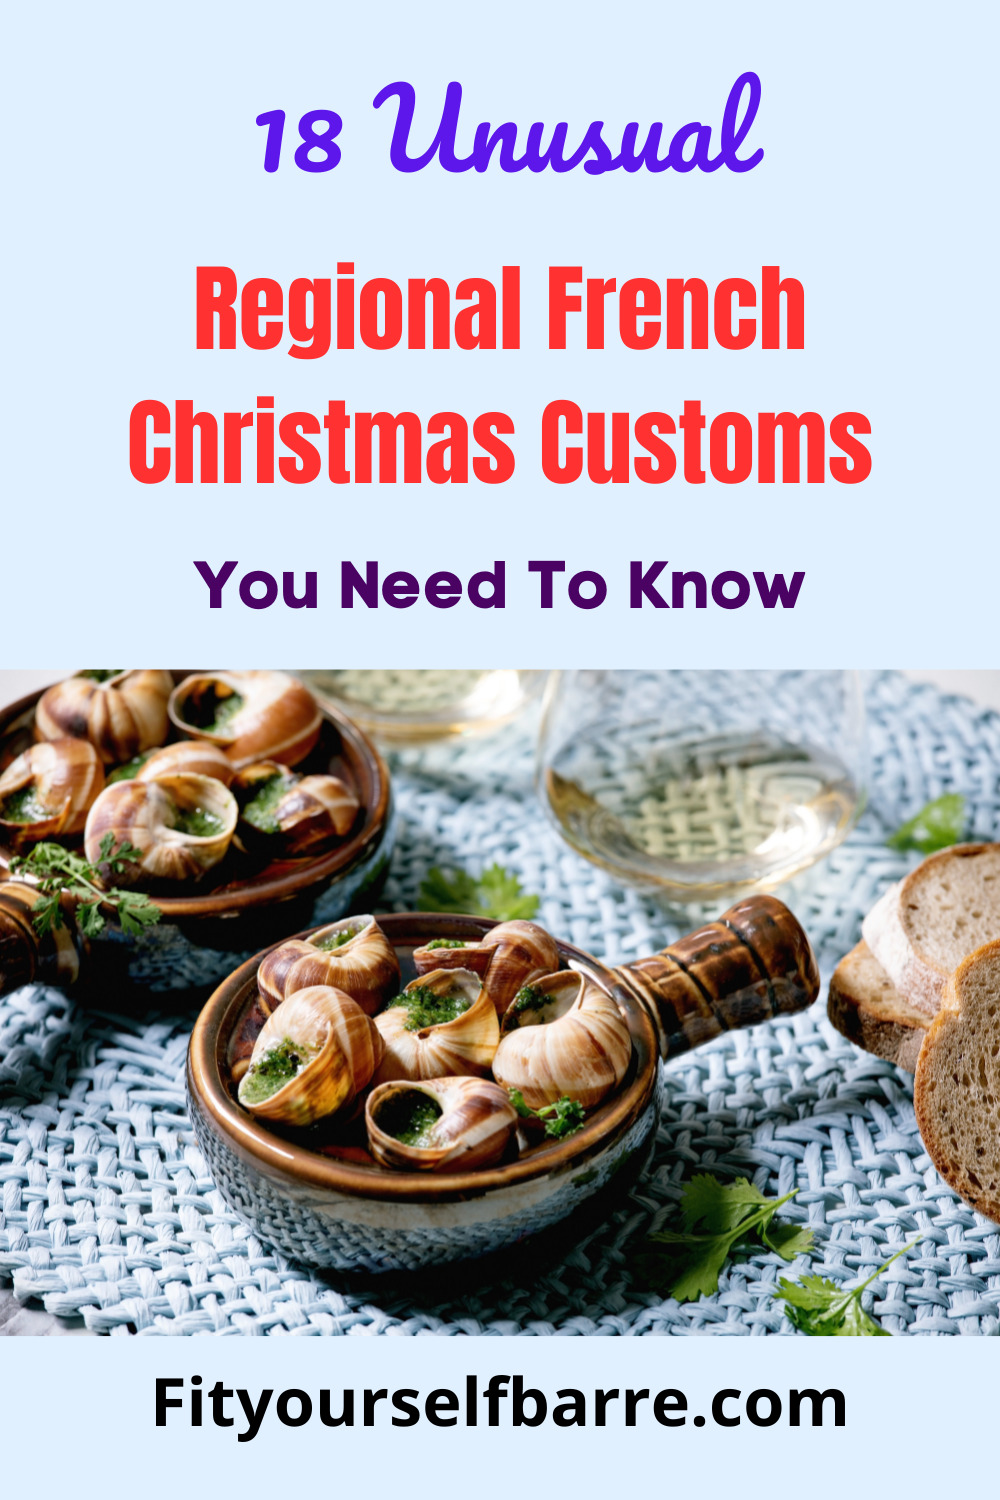 Unusual regional Christmas customs in France-escargots de Bourgogne-Bourgignonne snails in garlic herbs butter in French traditional ceramic pan